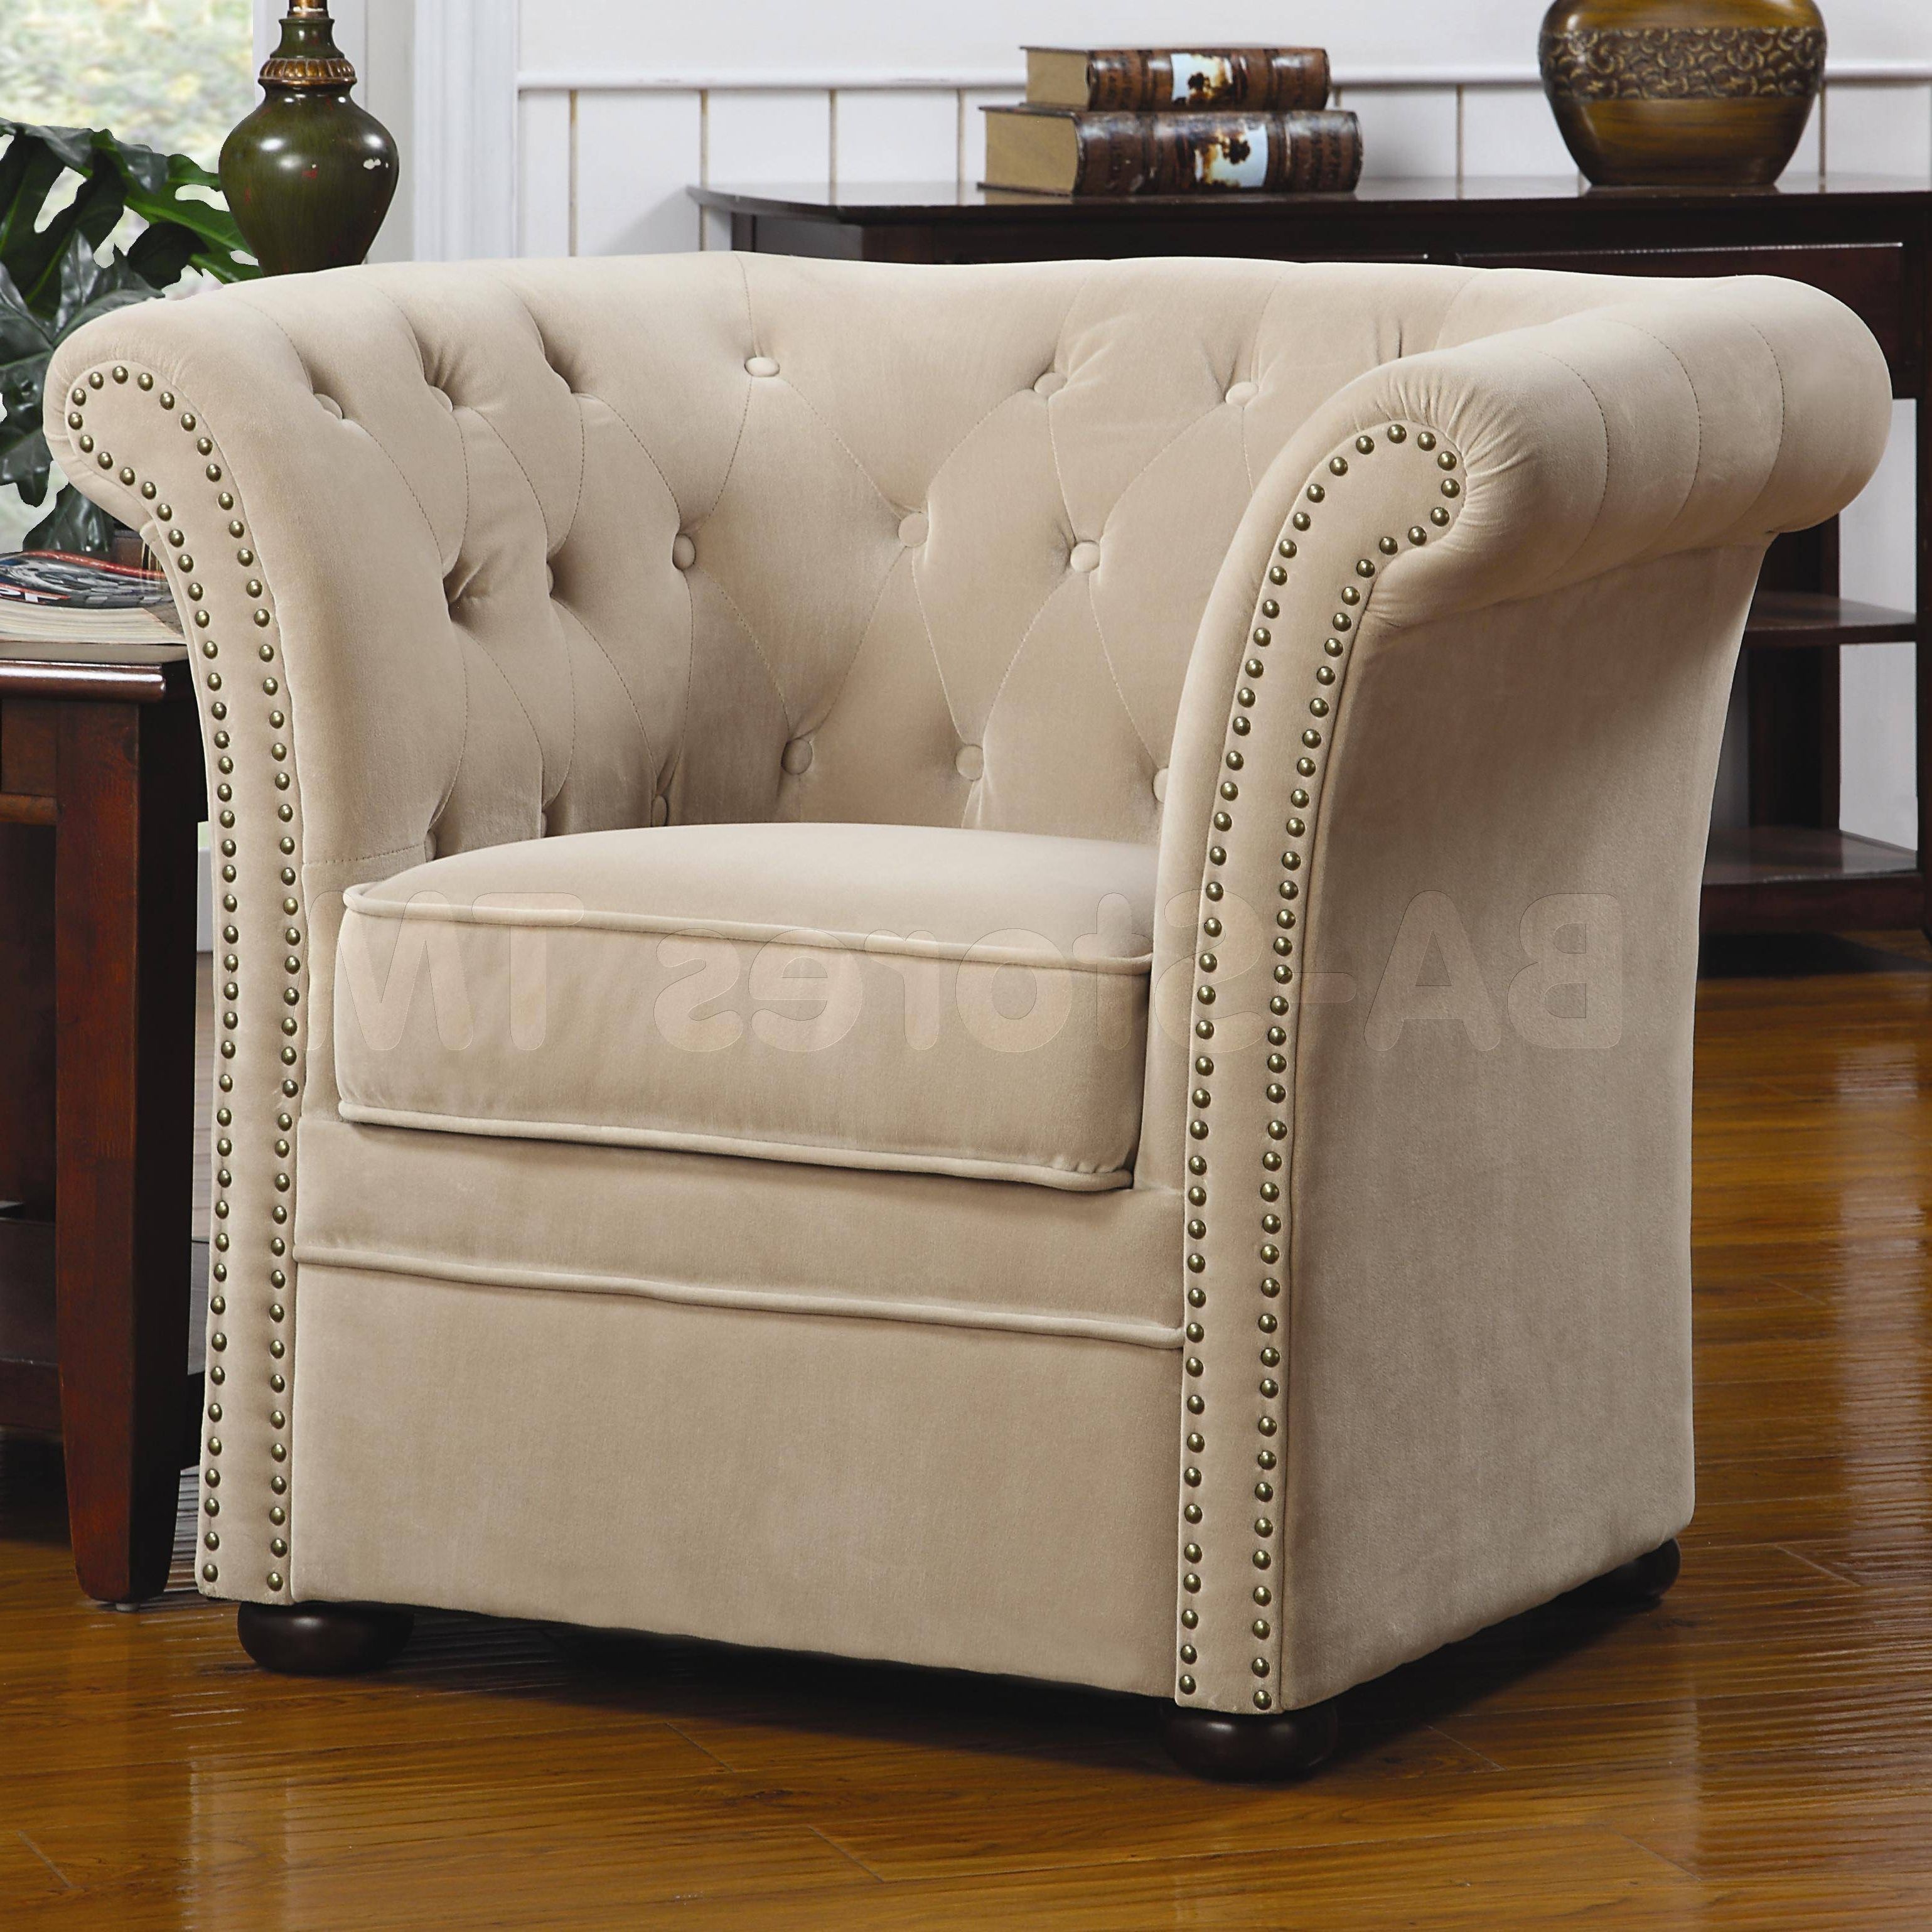 Best And Newest Chair And Sofa : Fabulous High Back Wing Chair Luxury High Back With Regard To High Back Sofas And Chairs (View 13 of 15)